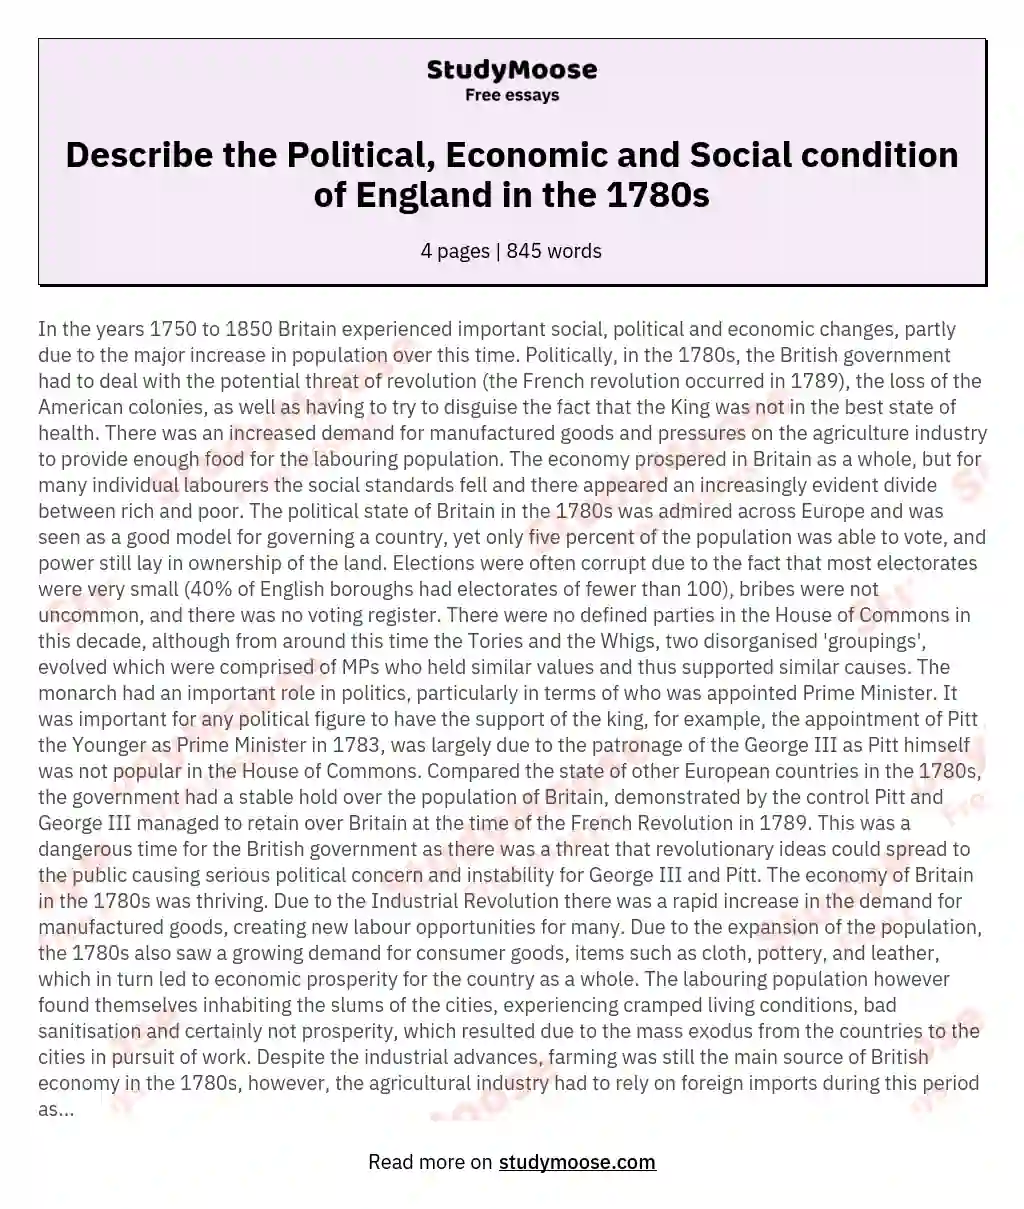 Describe the Political, Economic and Social condition of England in the 1780s essay